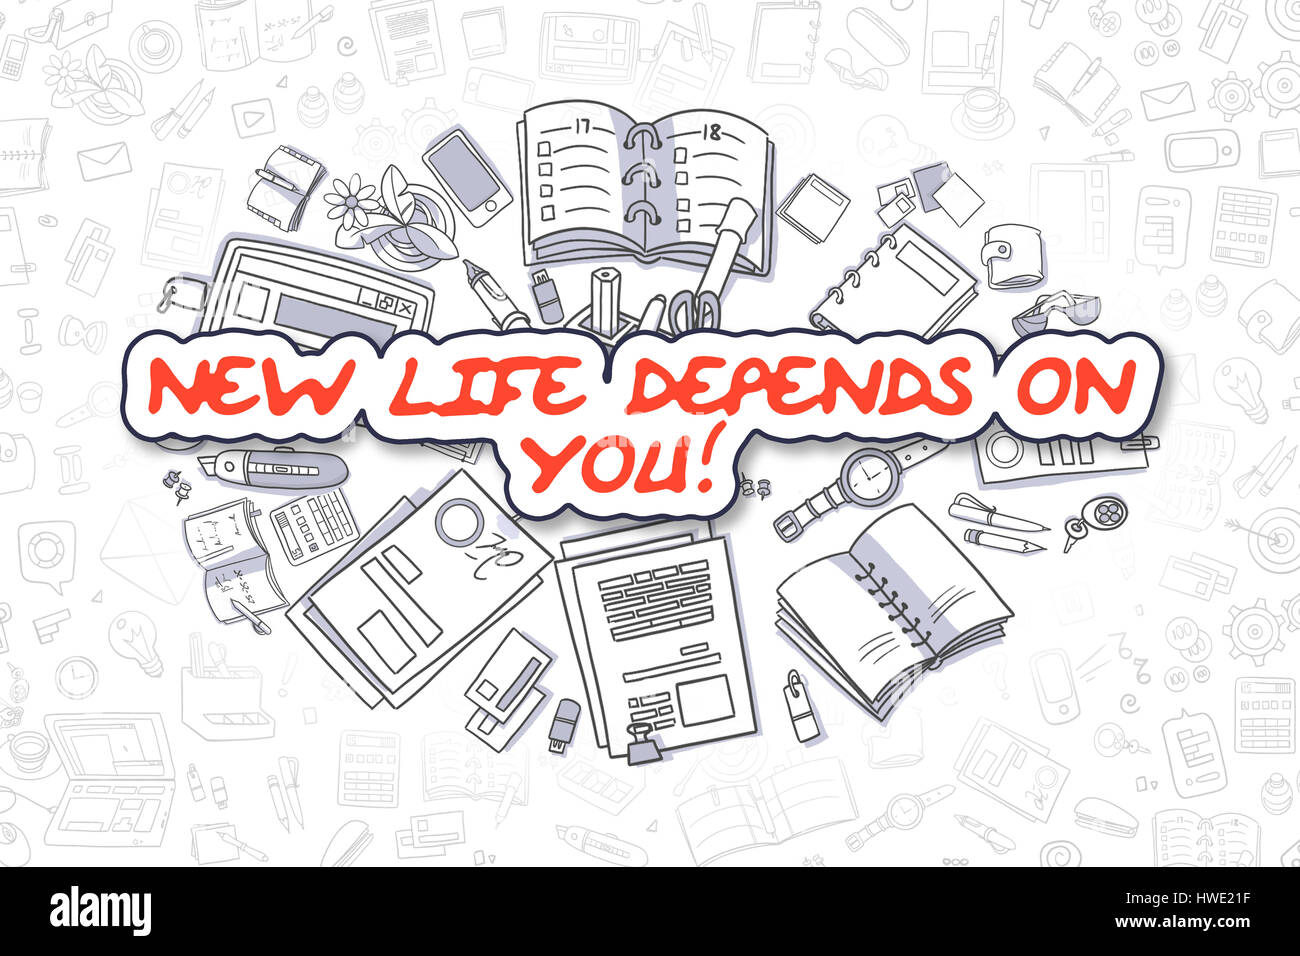 New Life Depends On You - Doodle Red Word. Business Concept. Stock Photo